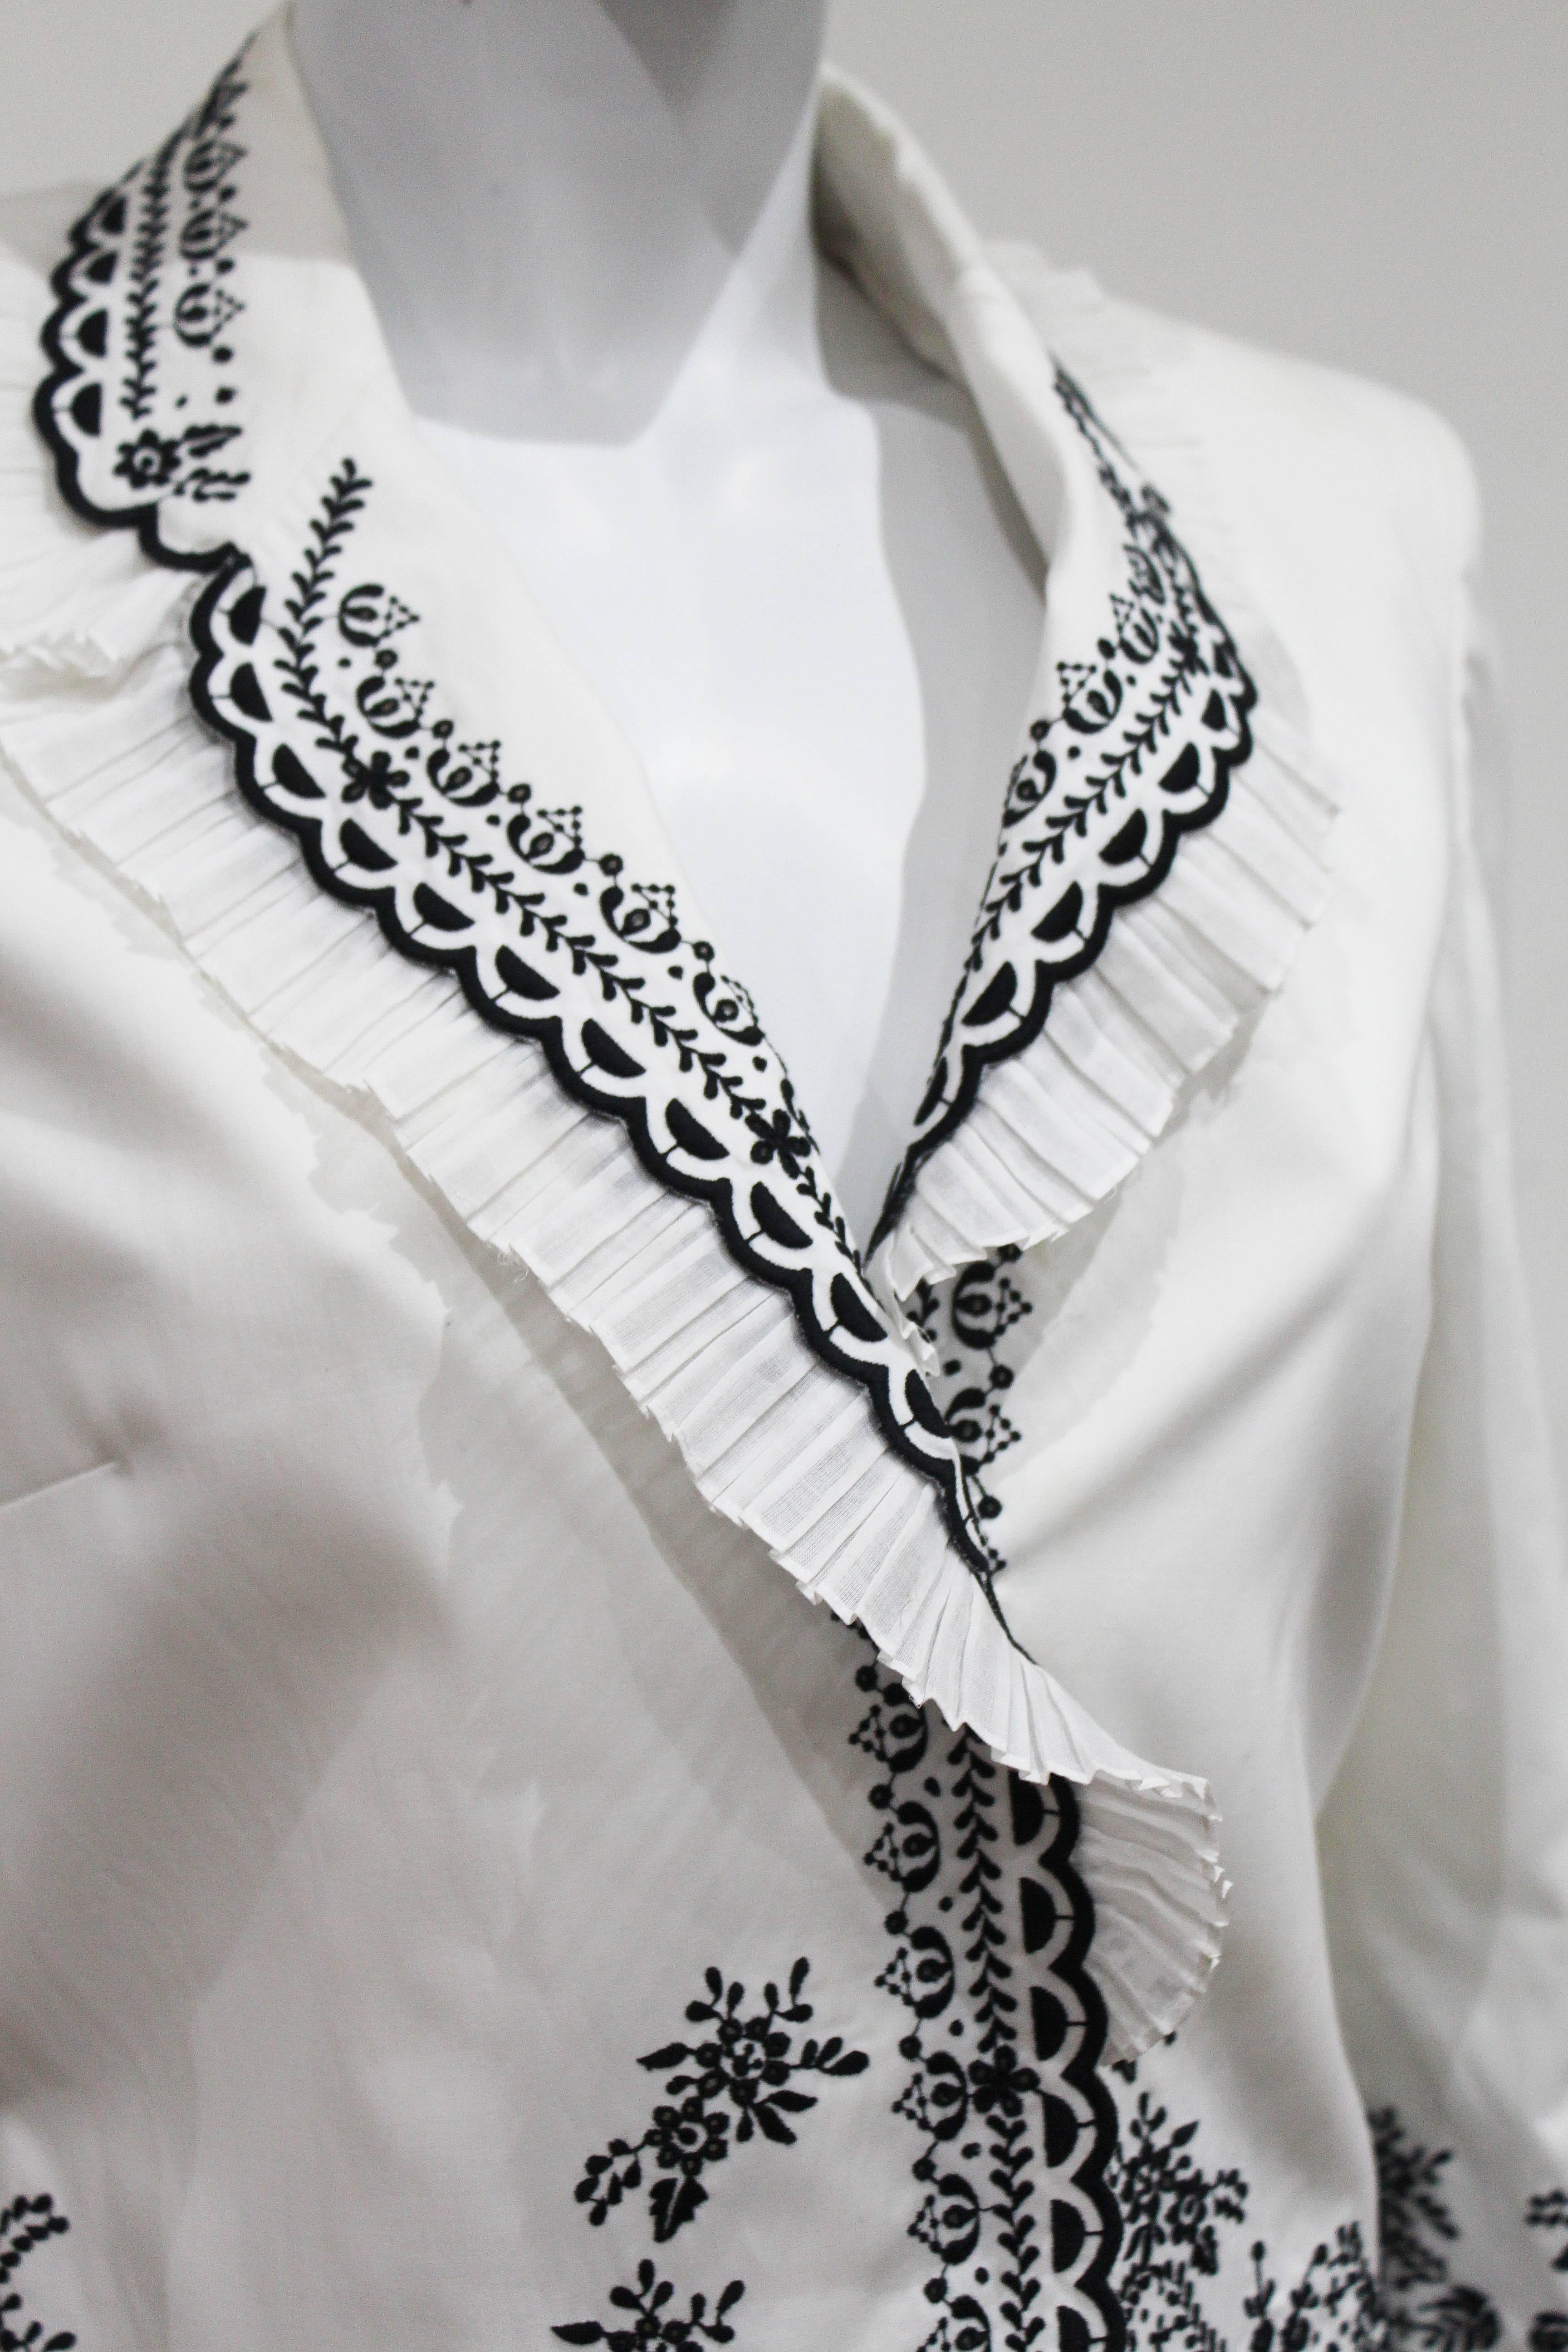 Gray Alexander McQueen embroidered tailored 'Sarabande' jacket, c. 2007 For Sale